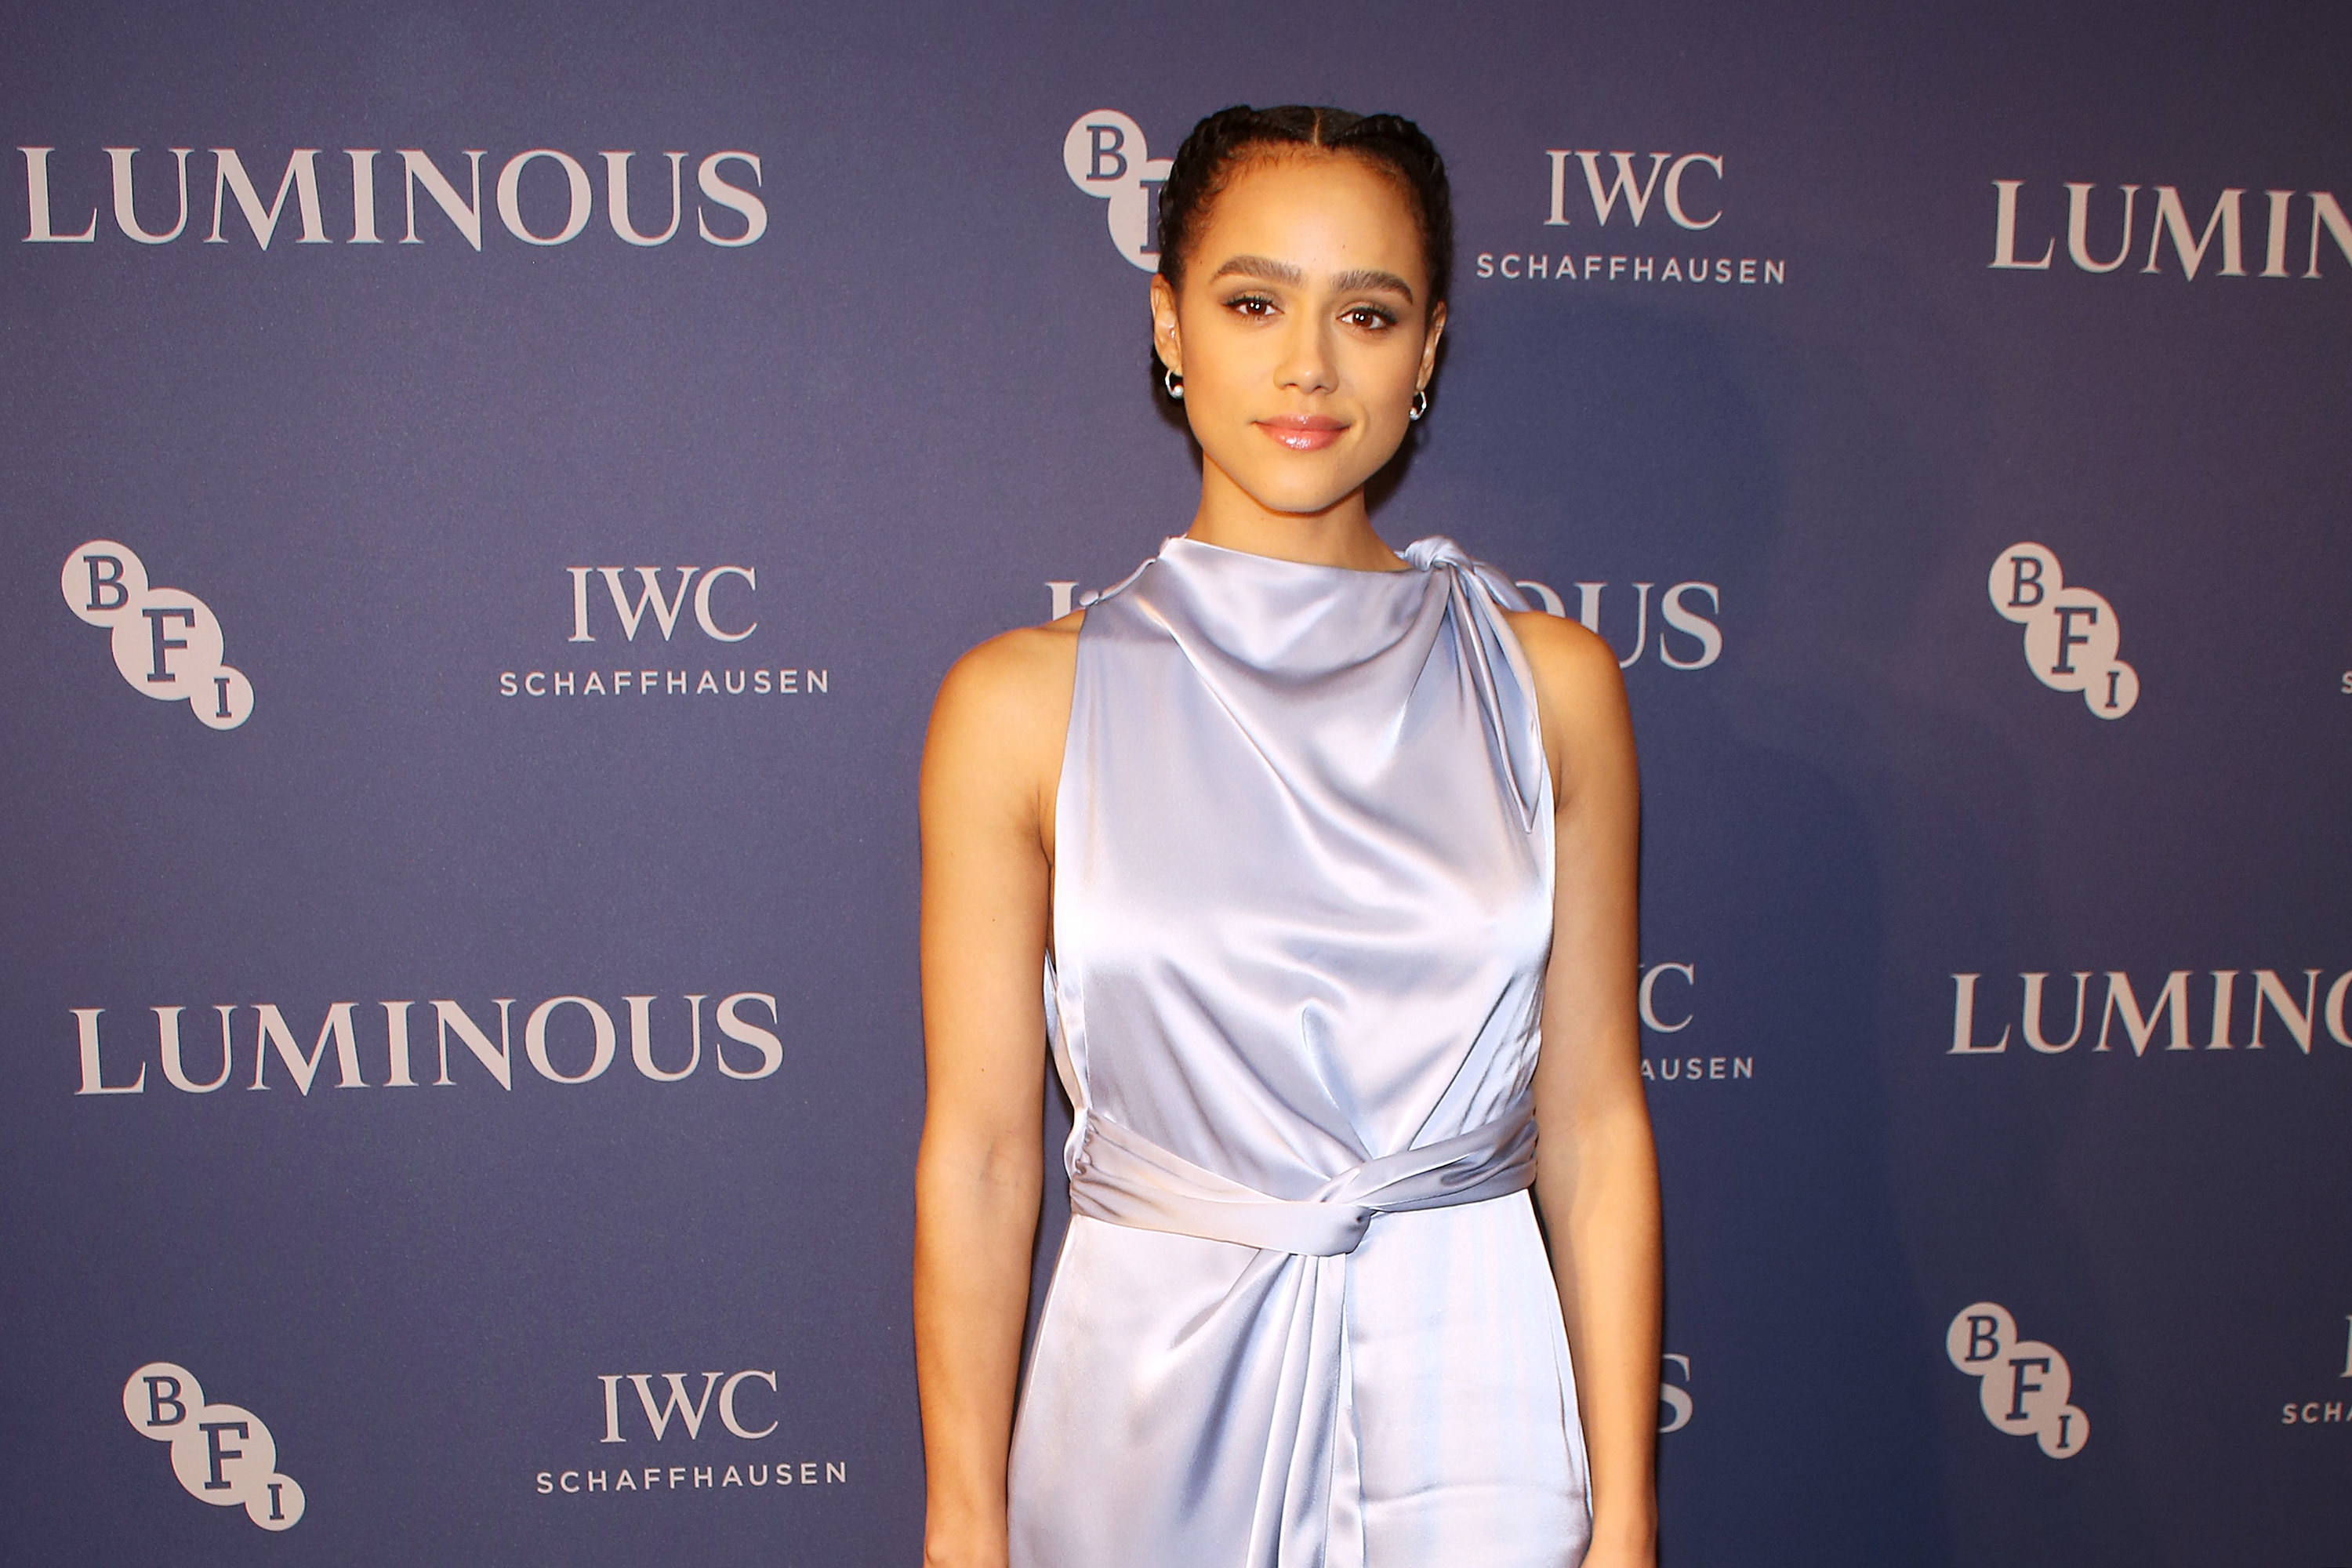 Nathalie Emmanuel attends the BFI &amp;amp; IWC Luminous Gala at The Roundhouse on October 1, 2019, in London, England